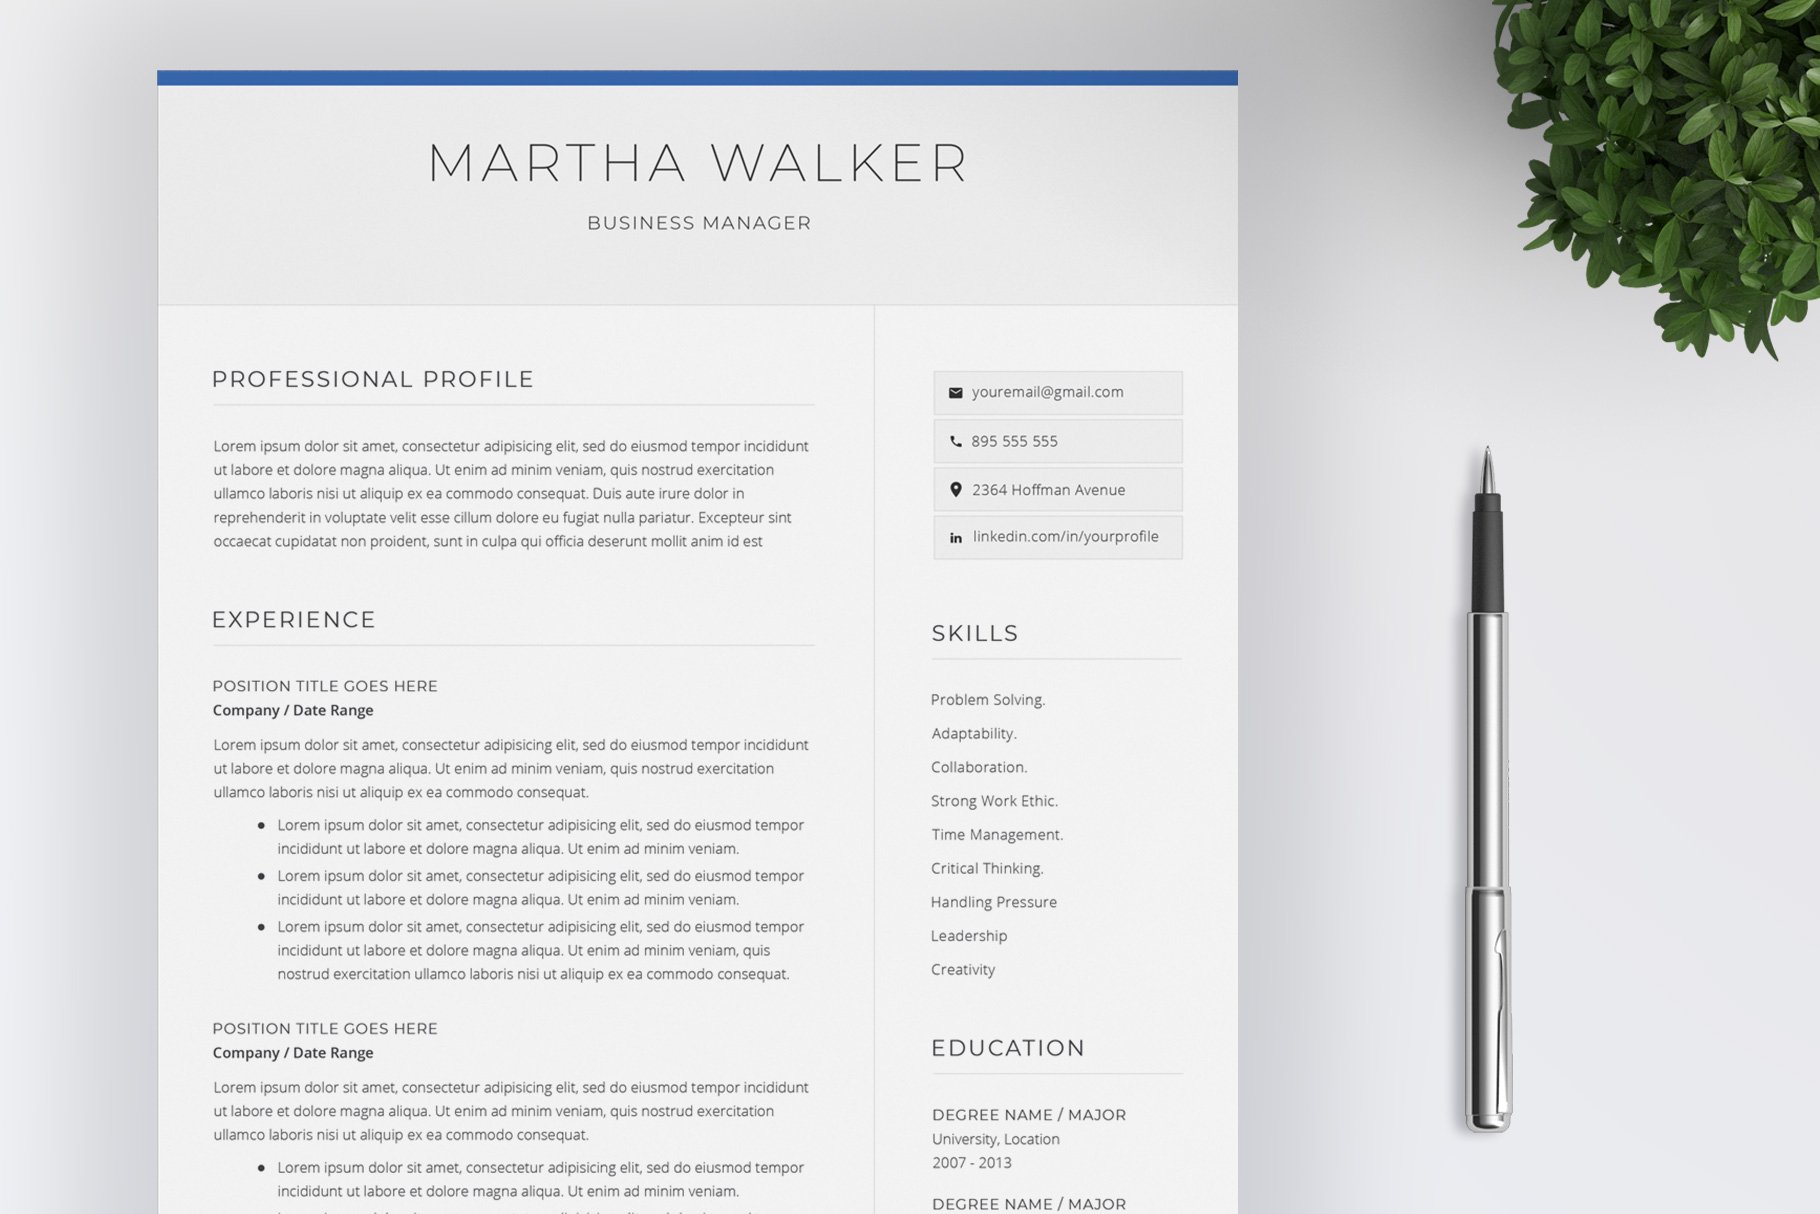 Resume & Cover Letter | CV Template cover image.